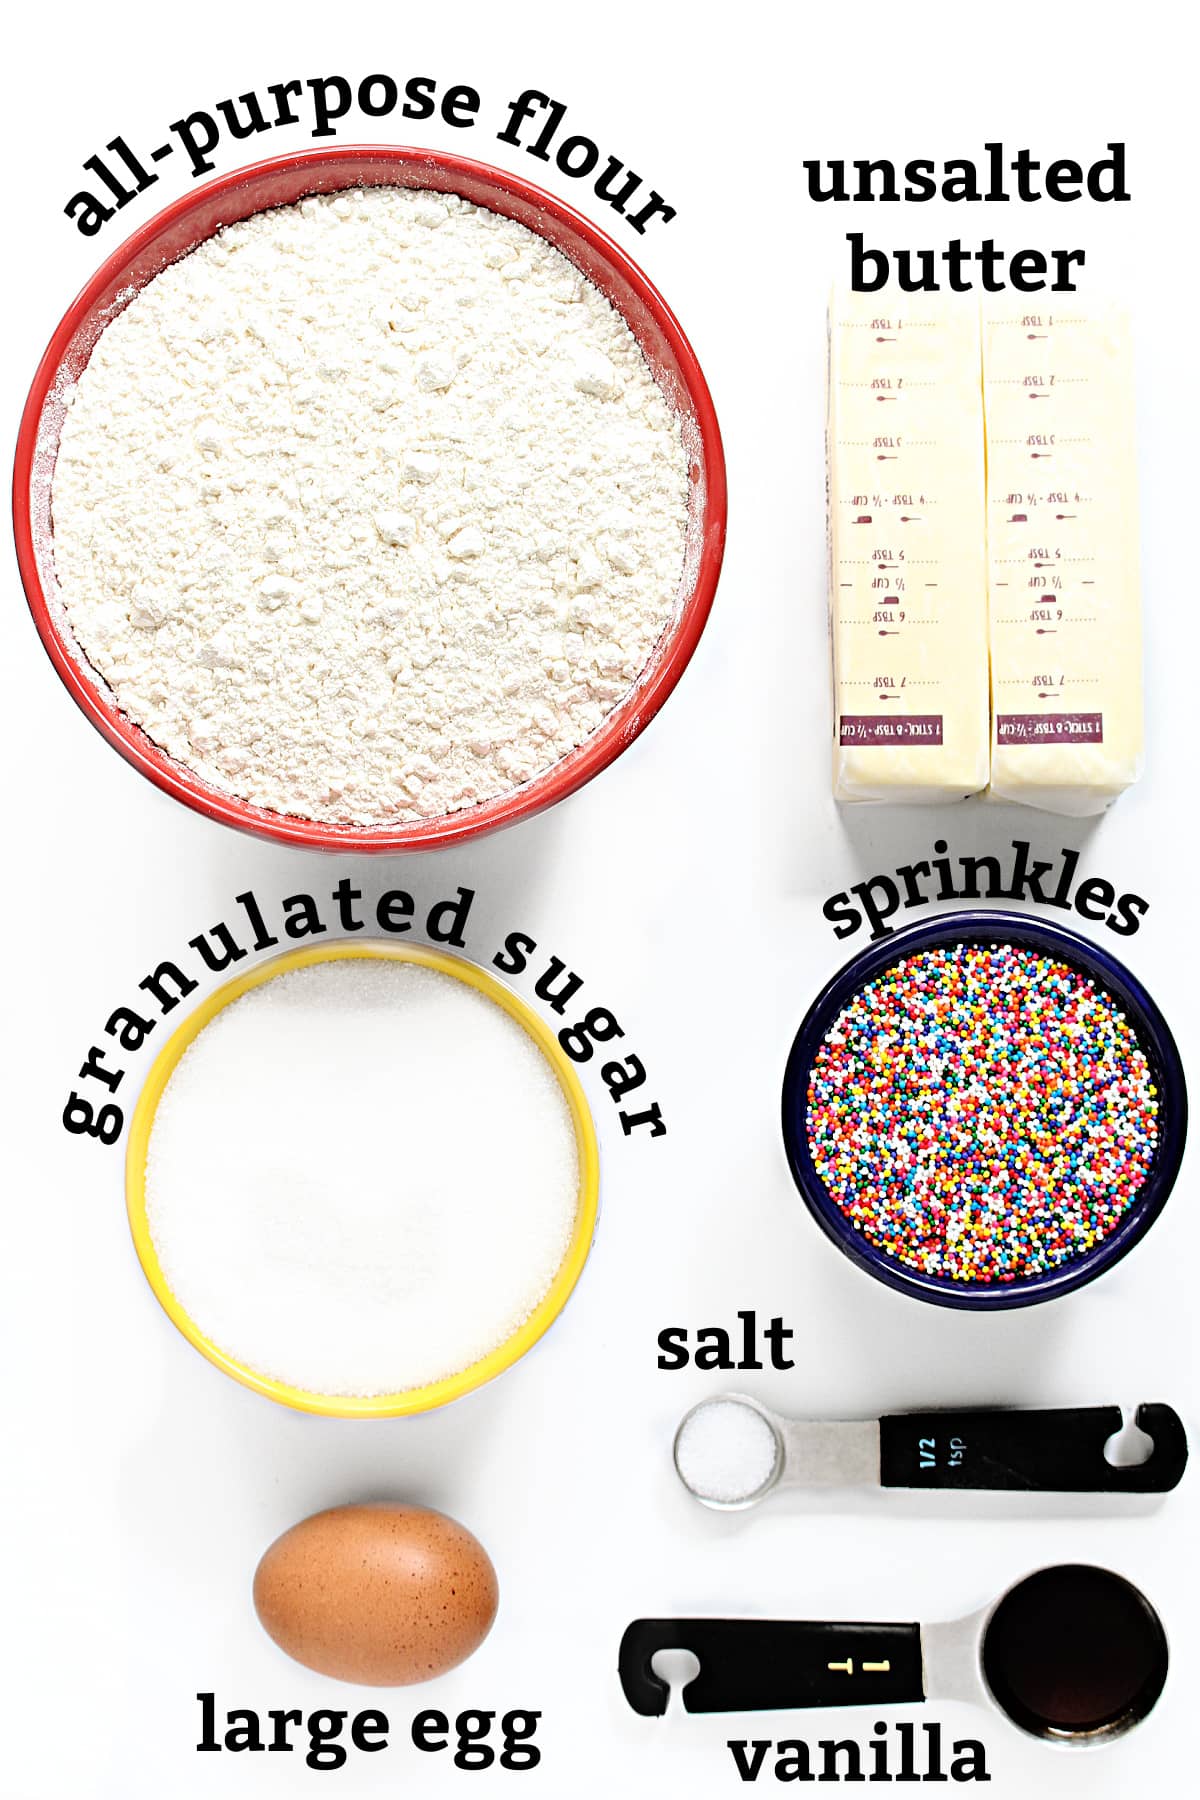 Ingredients labeled; all-purpose flour, unsalted butter, granulated sugar, sprinkles, large egg, vanilla.